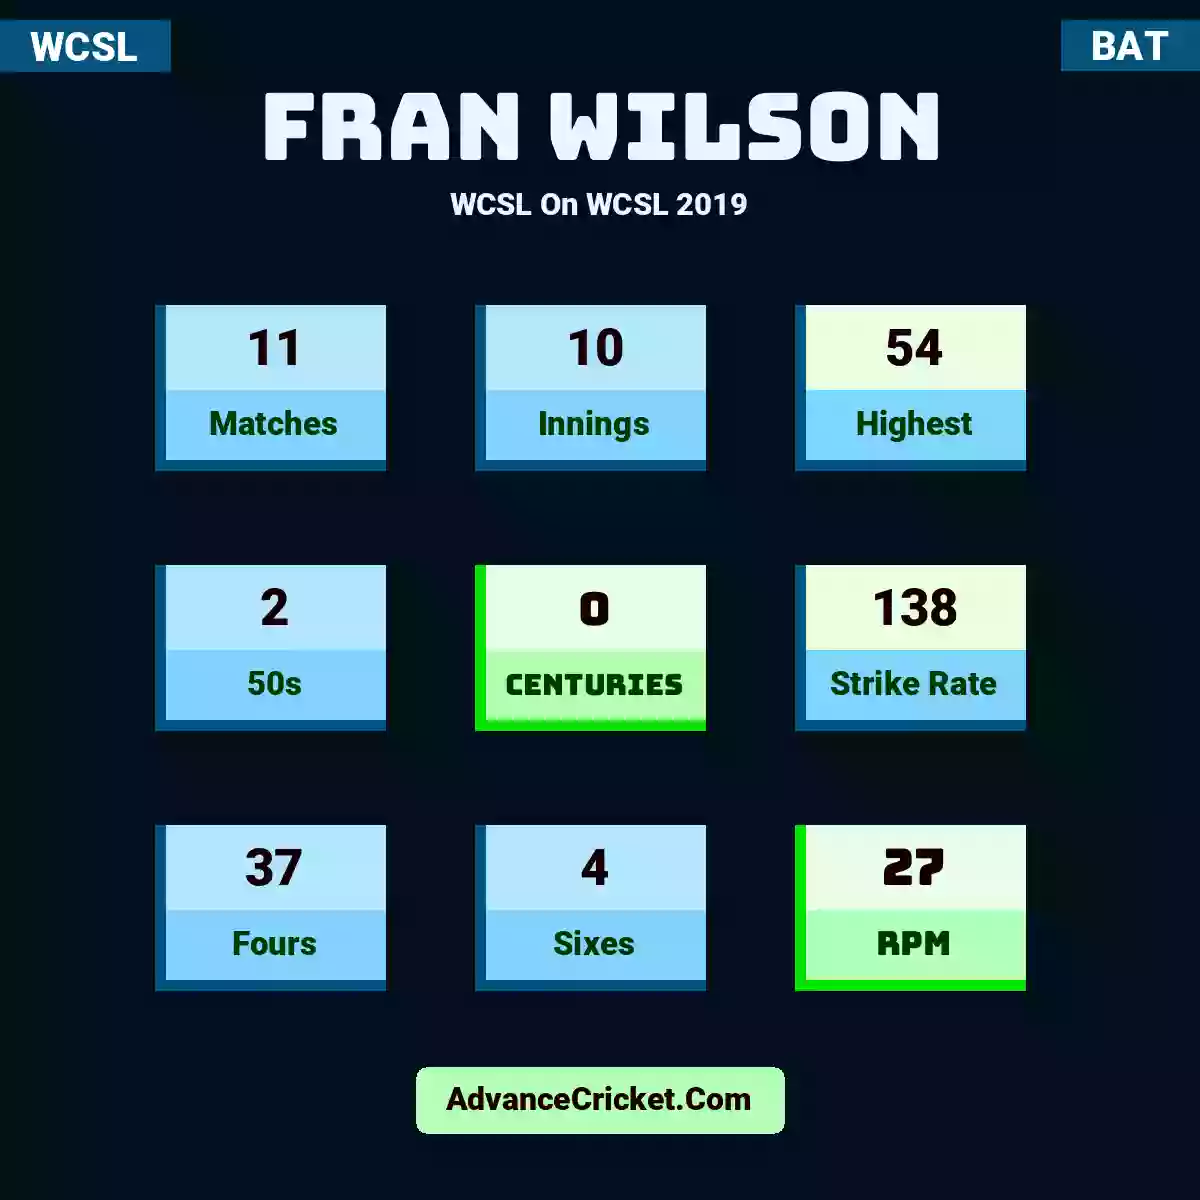 Fran Wilson WCSL  On WCSL 2019, Fran Wilson played 11 matches, scored 54 runs as highest, 2 half-centuries, and 0 centuries, with a strike rate of 138. F.Wilson hit 37 fours and 4 sixes, with an RPM of 27.